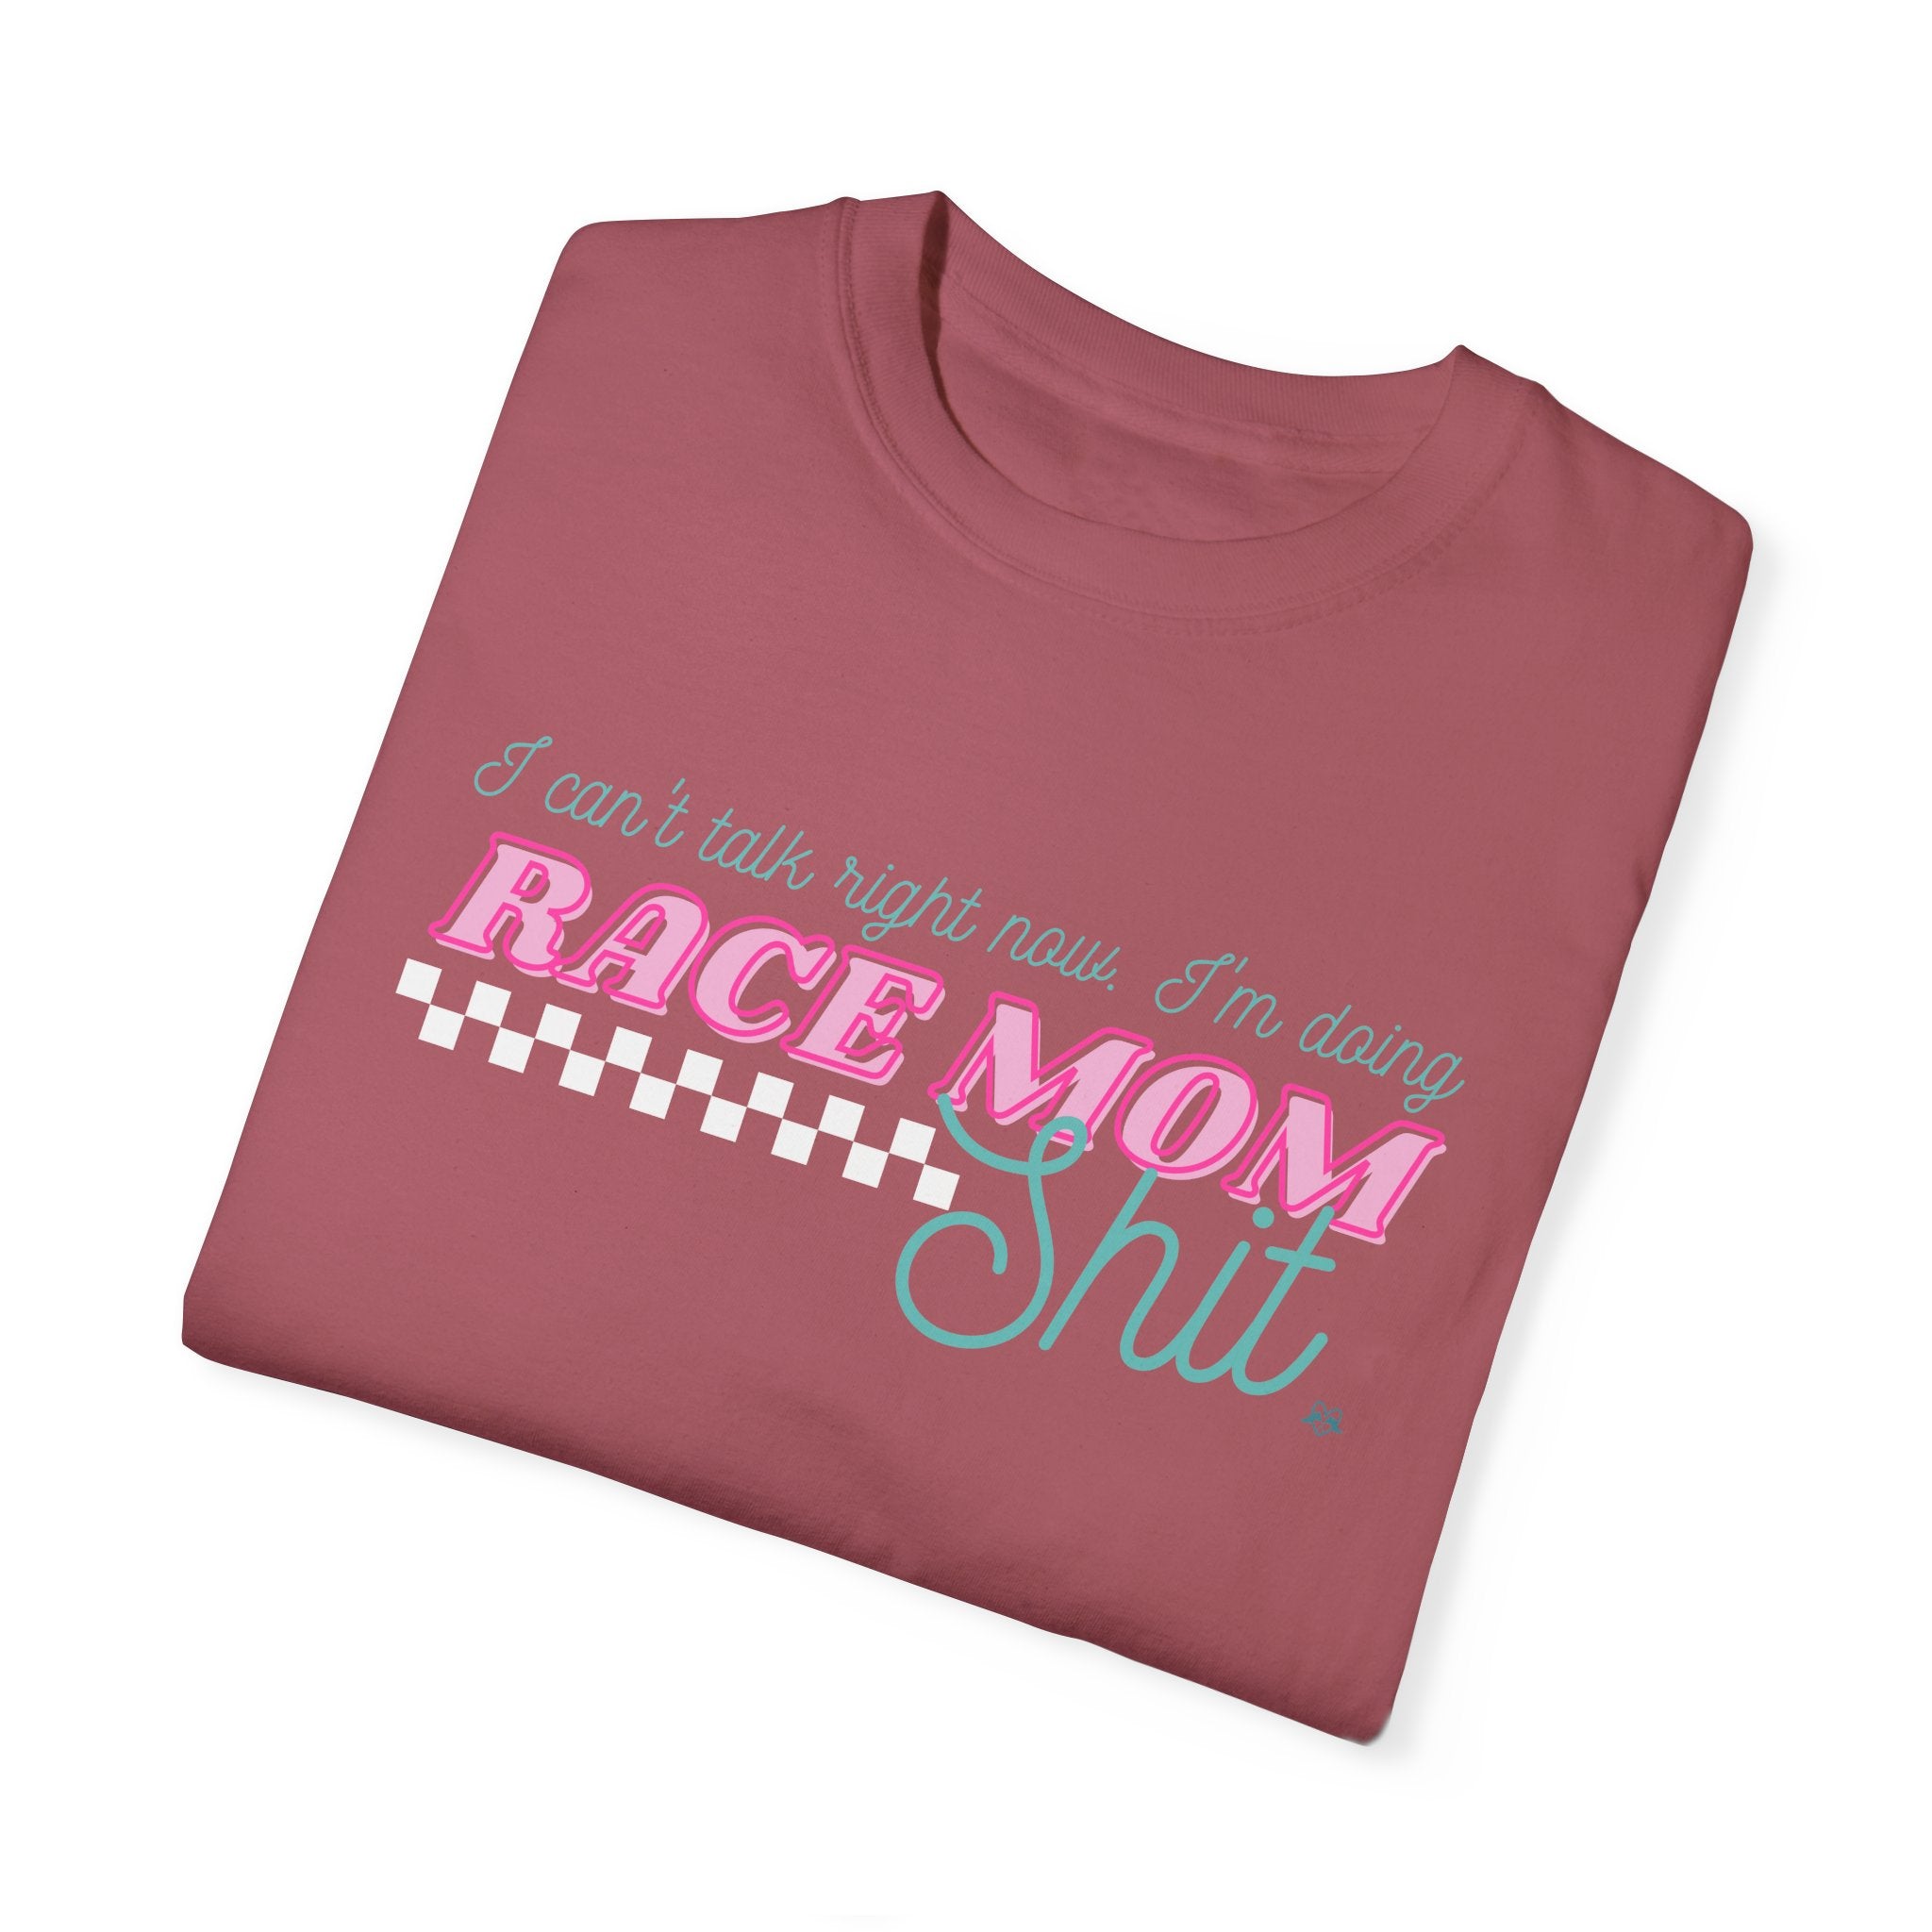 I Can't Talk Right Now I'm Doing Race Mom Shit Unisex Heavyweight Ladies Racing Tee